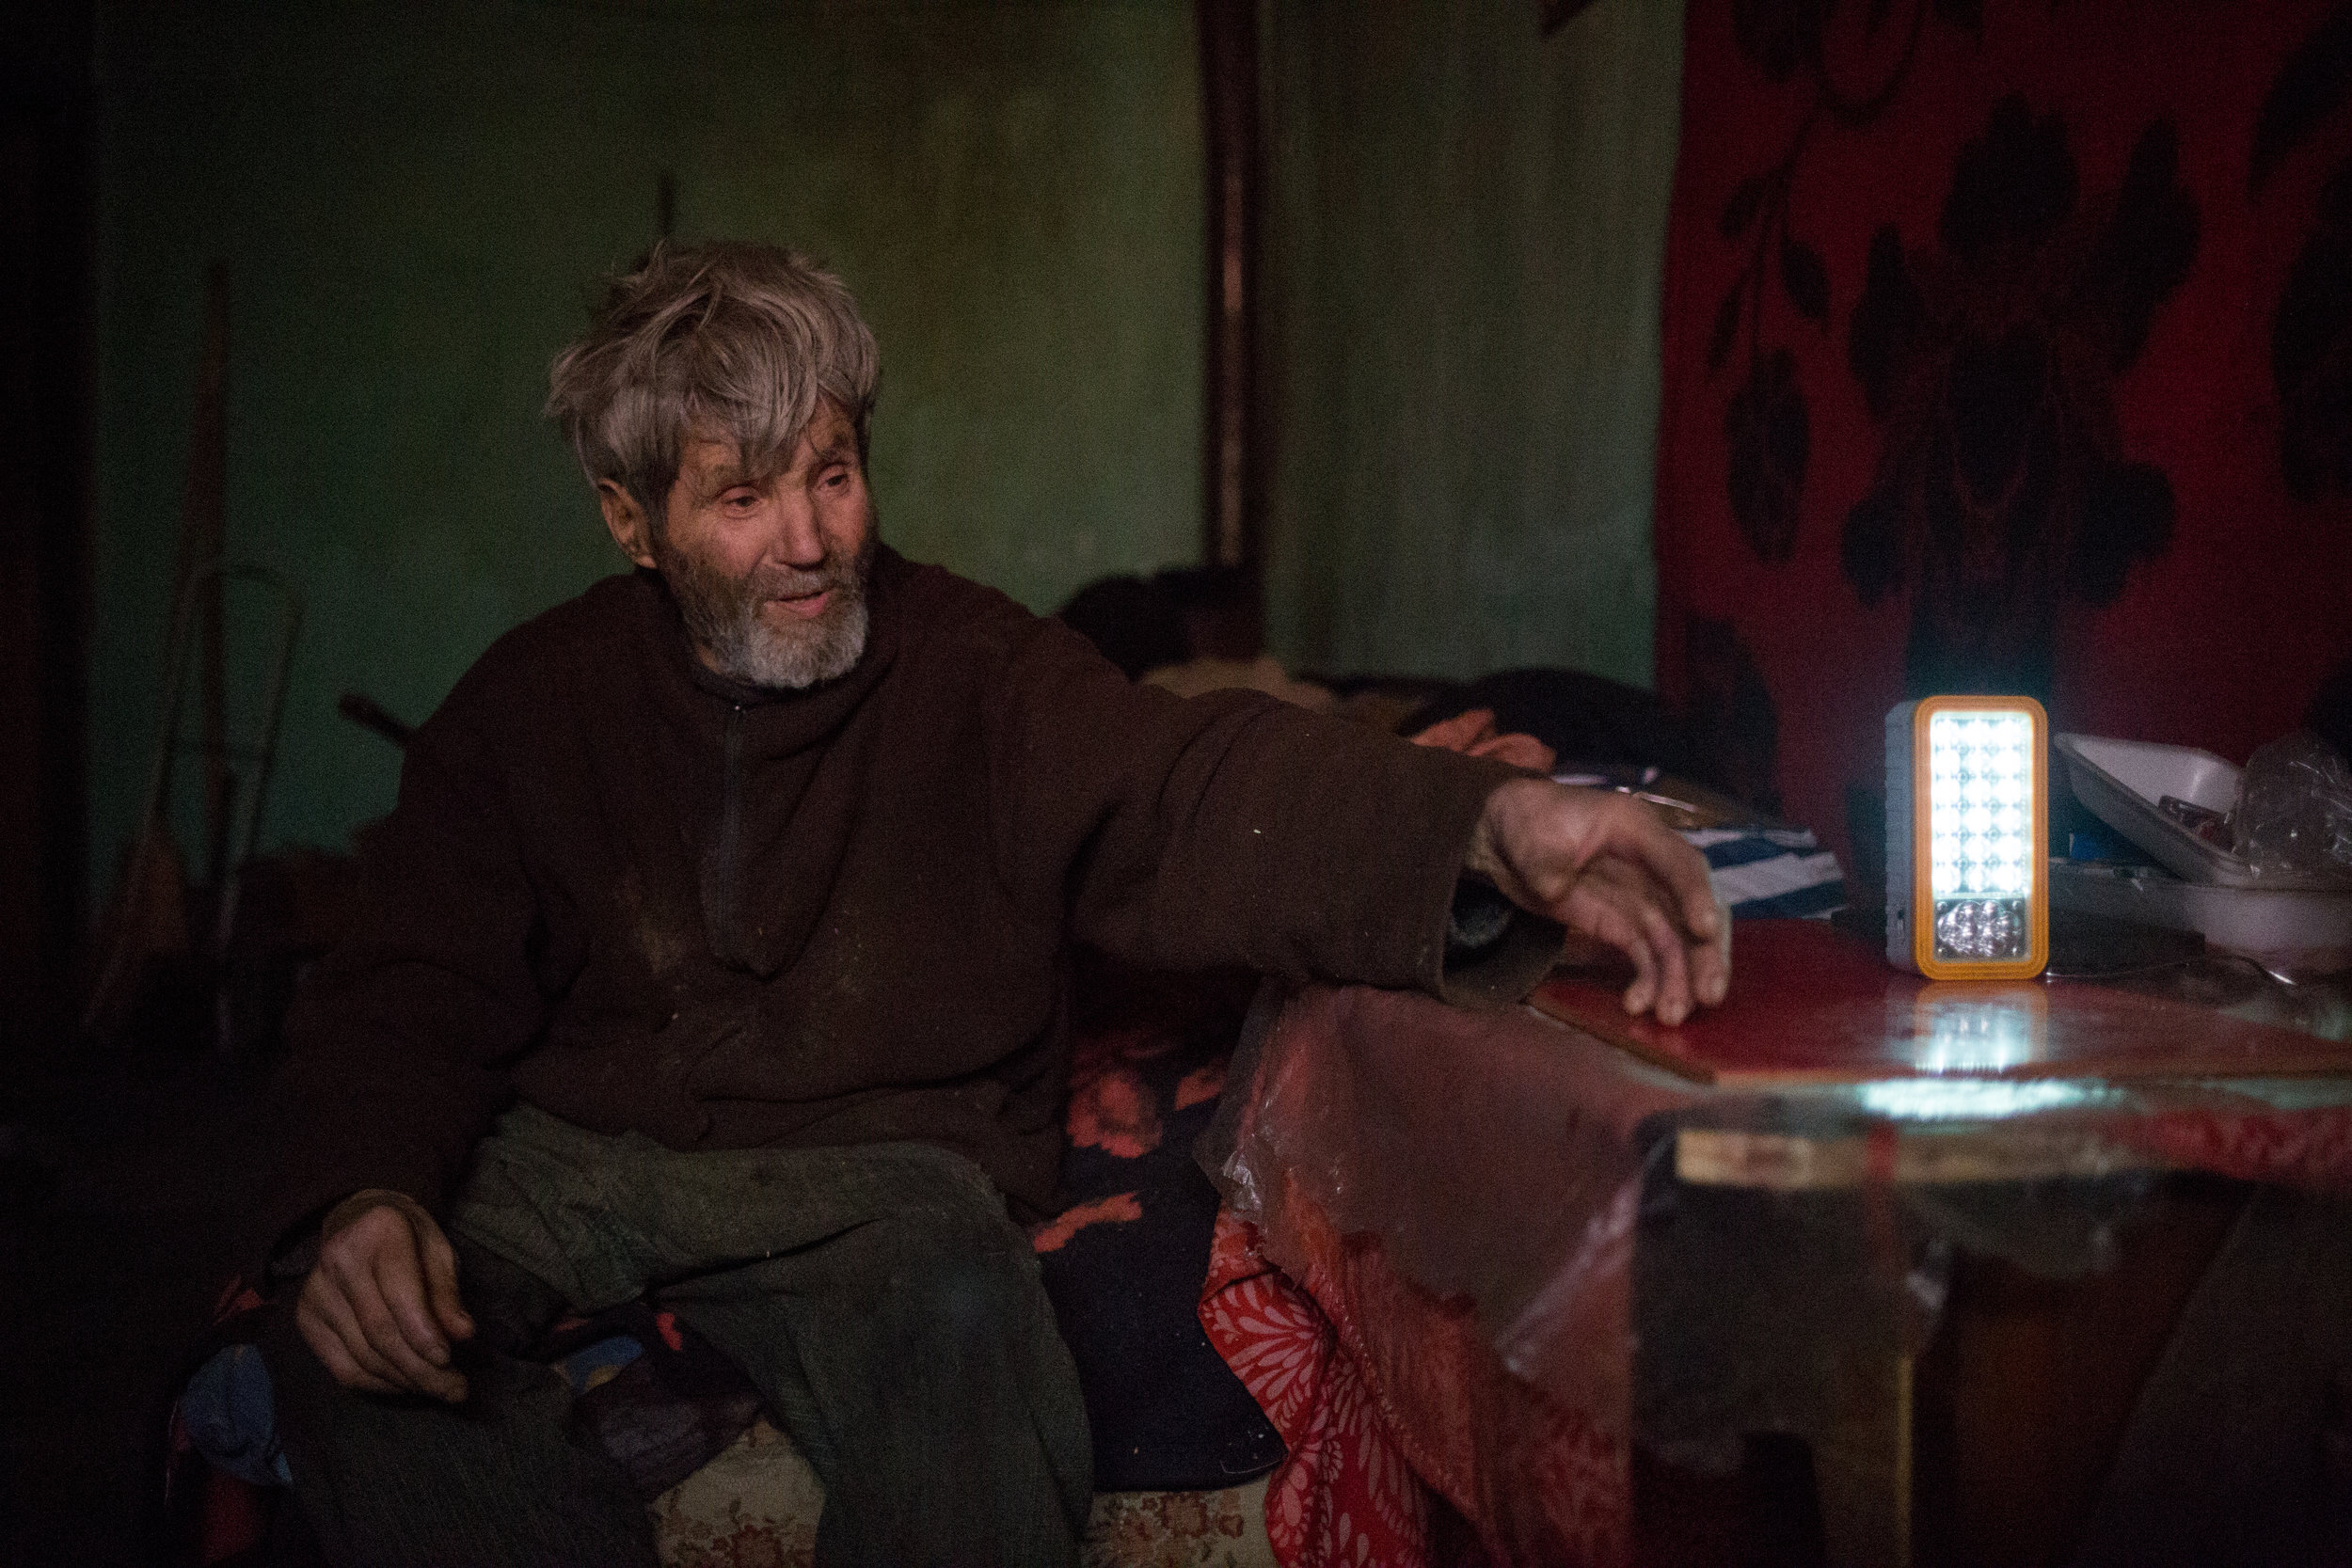 ROU_Oituz_81_old_man_with_electric_lamp.jpg